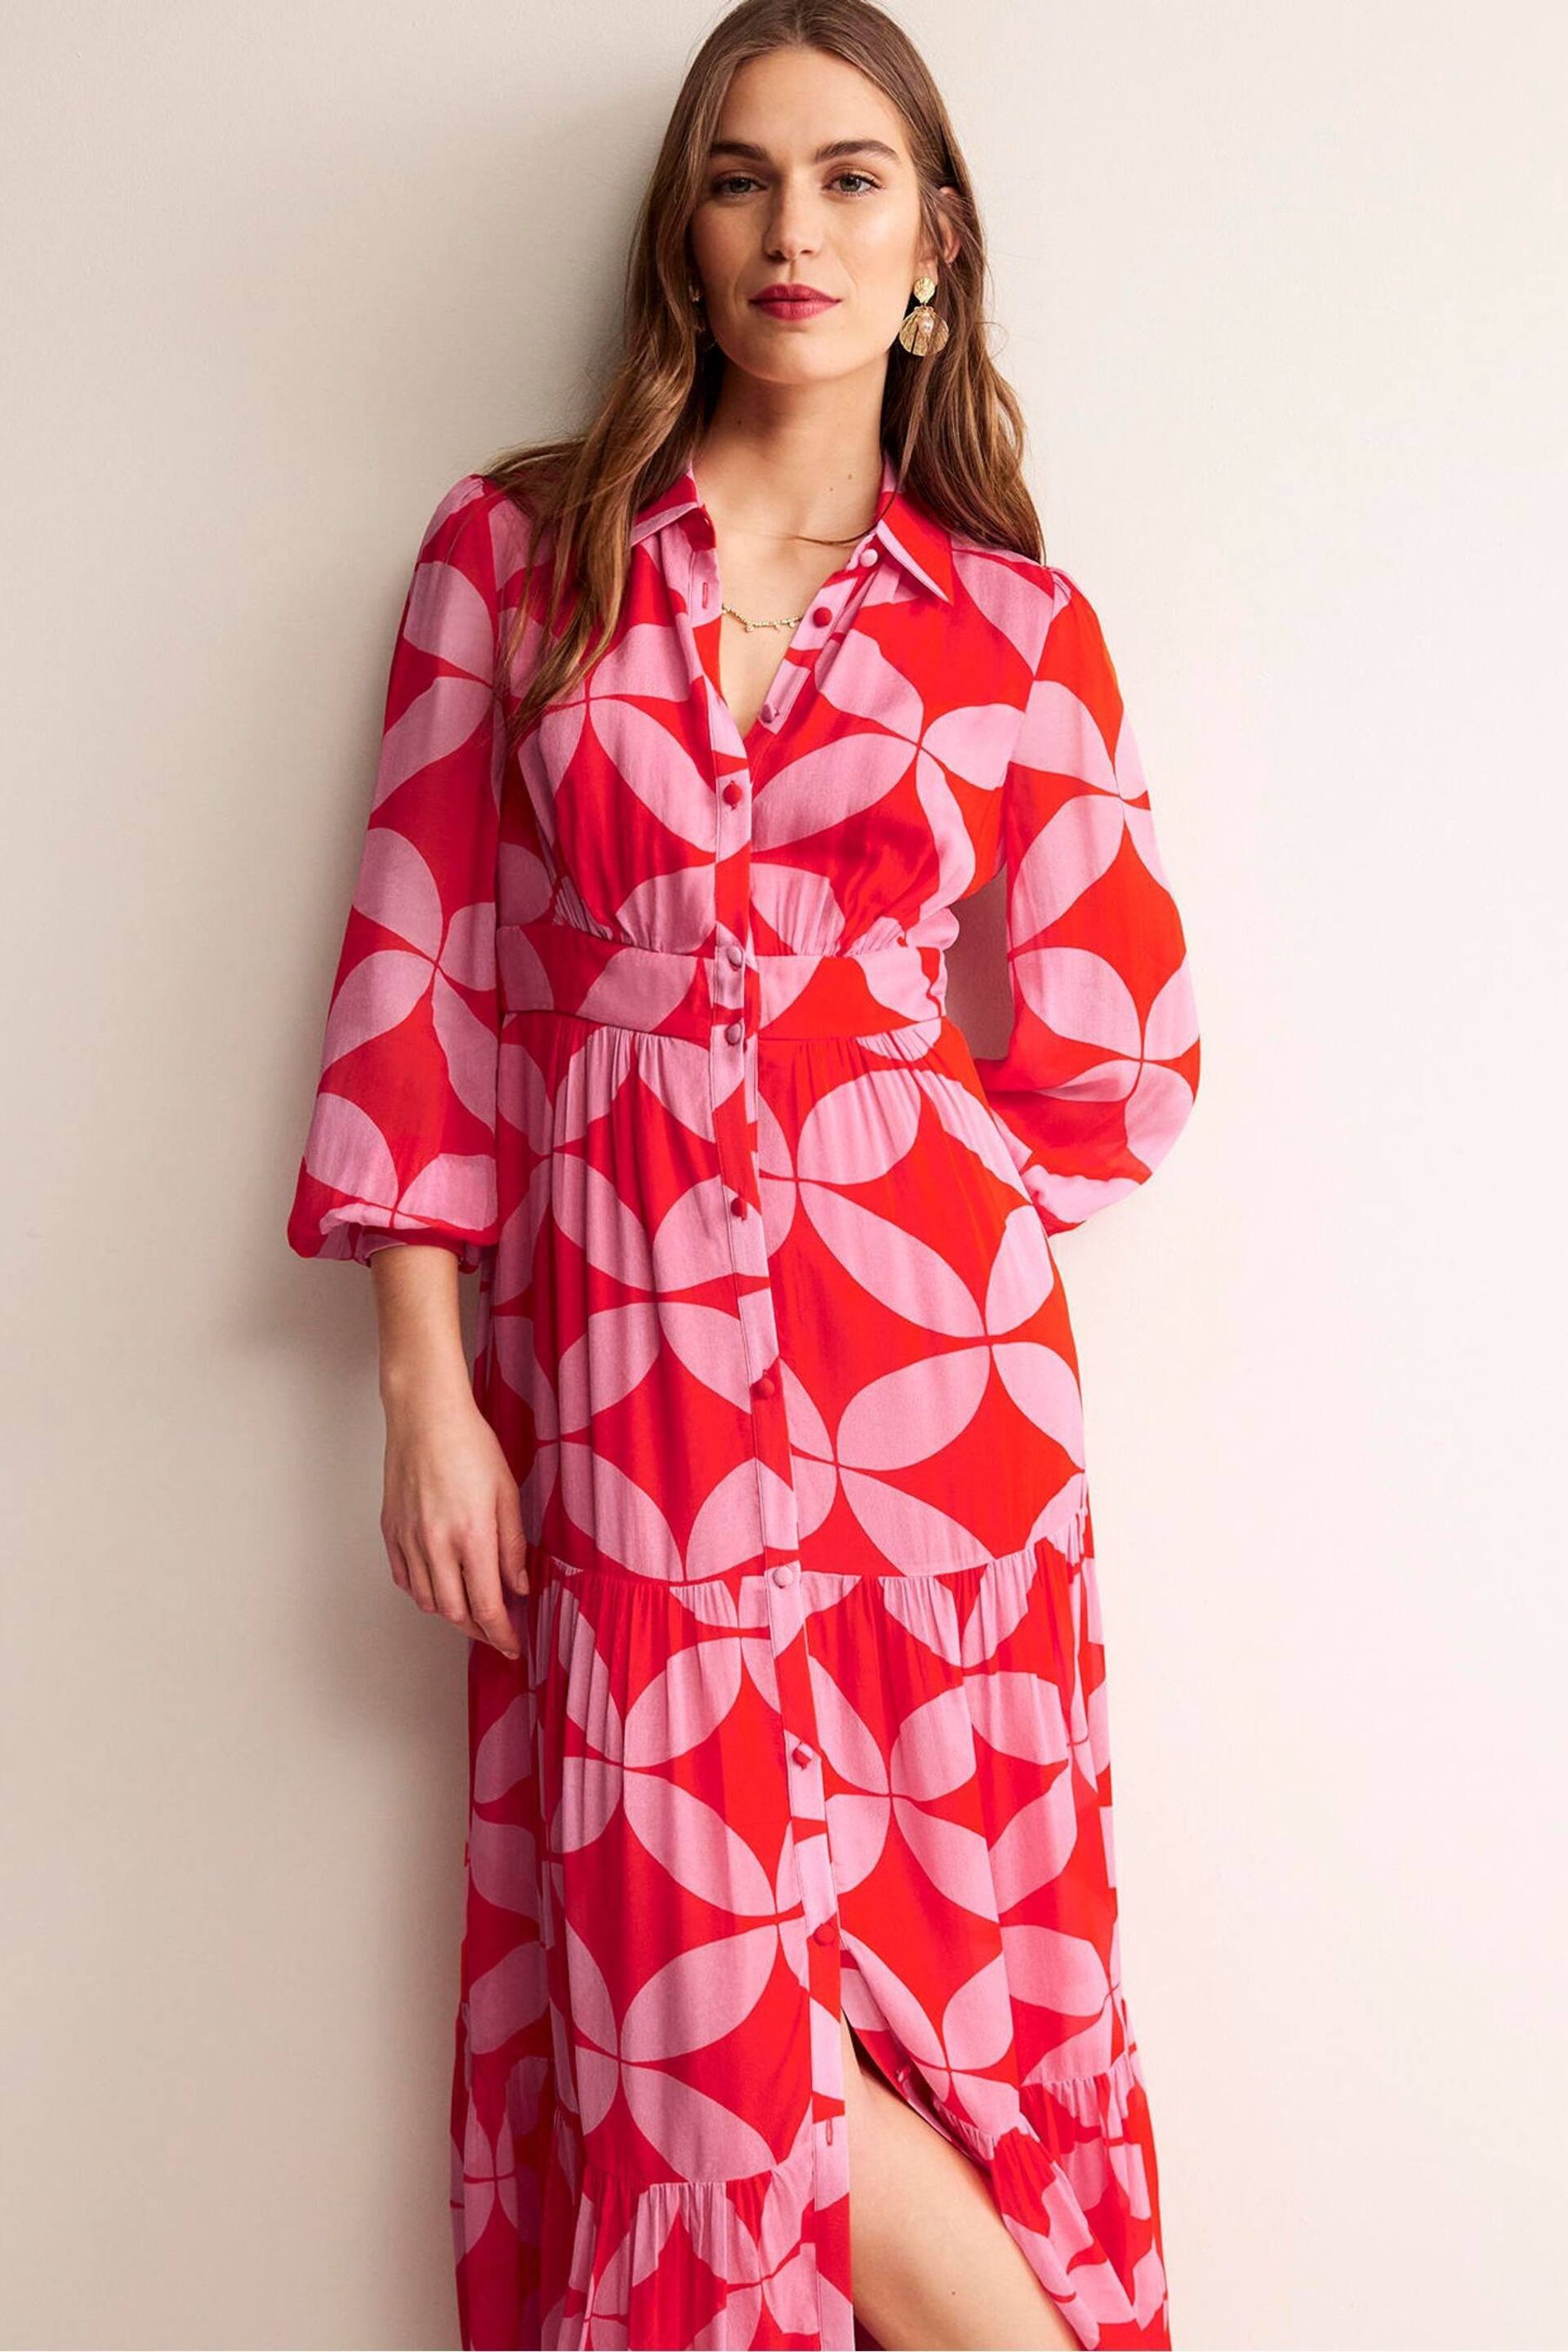 Boden Red Occasion Maxi Shirt Dress - Image 5 of 6